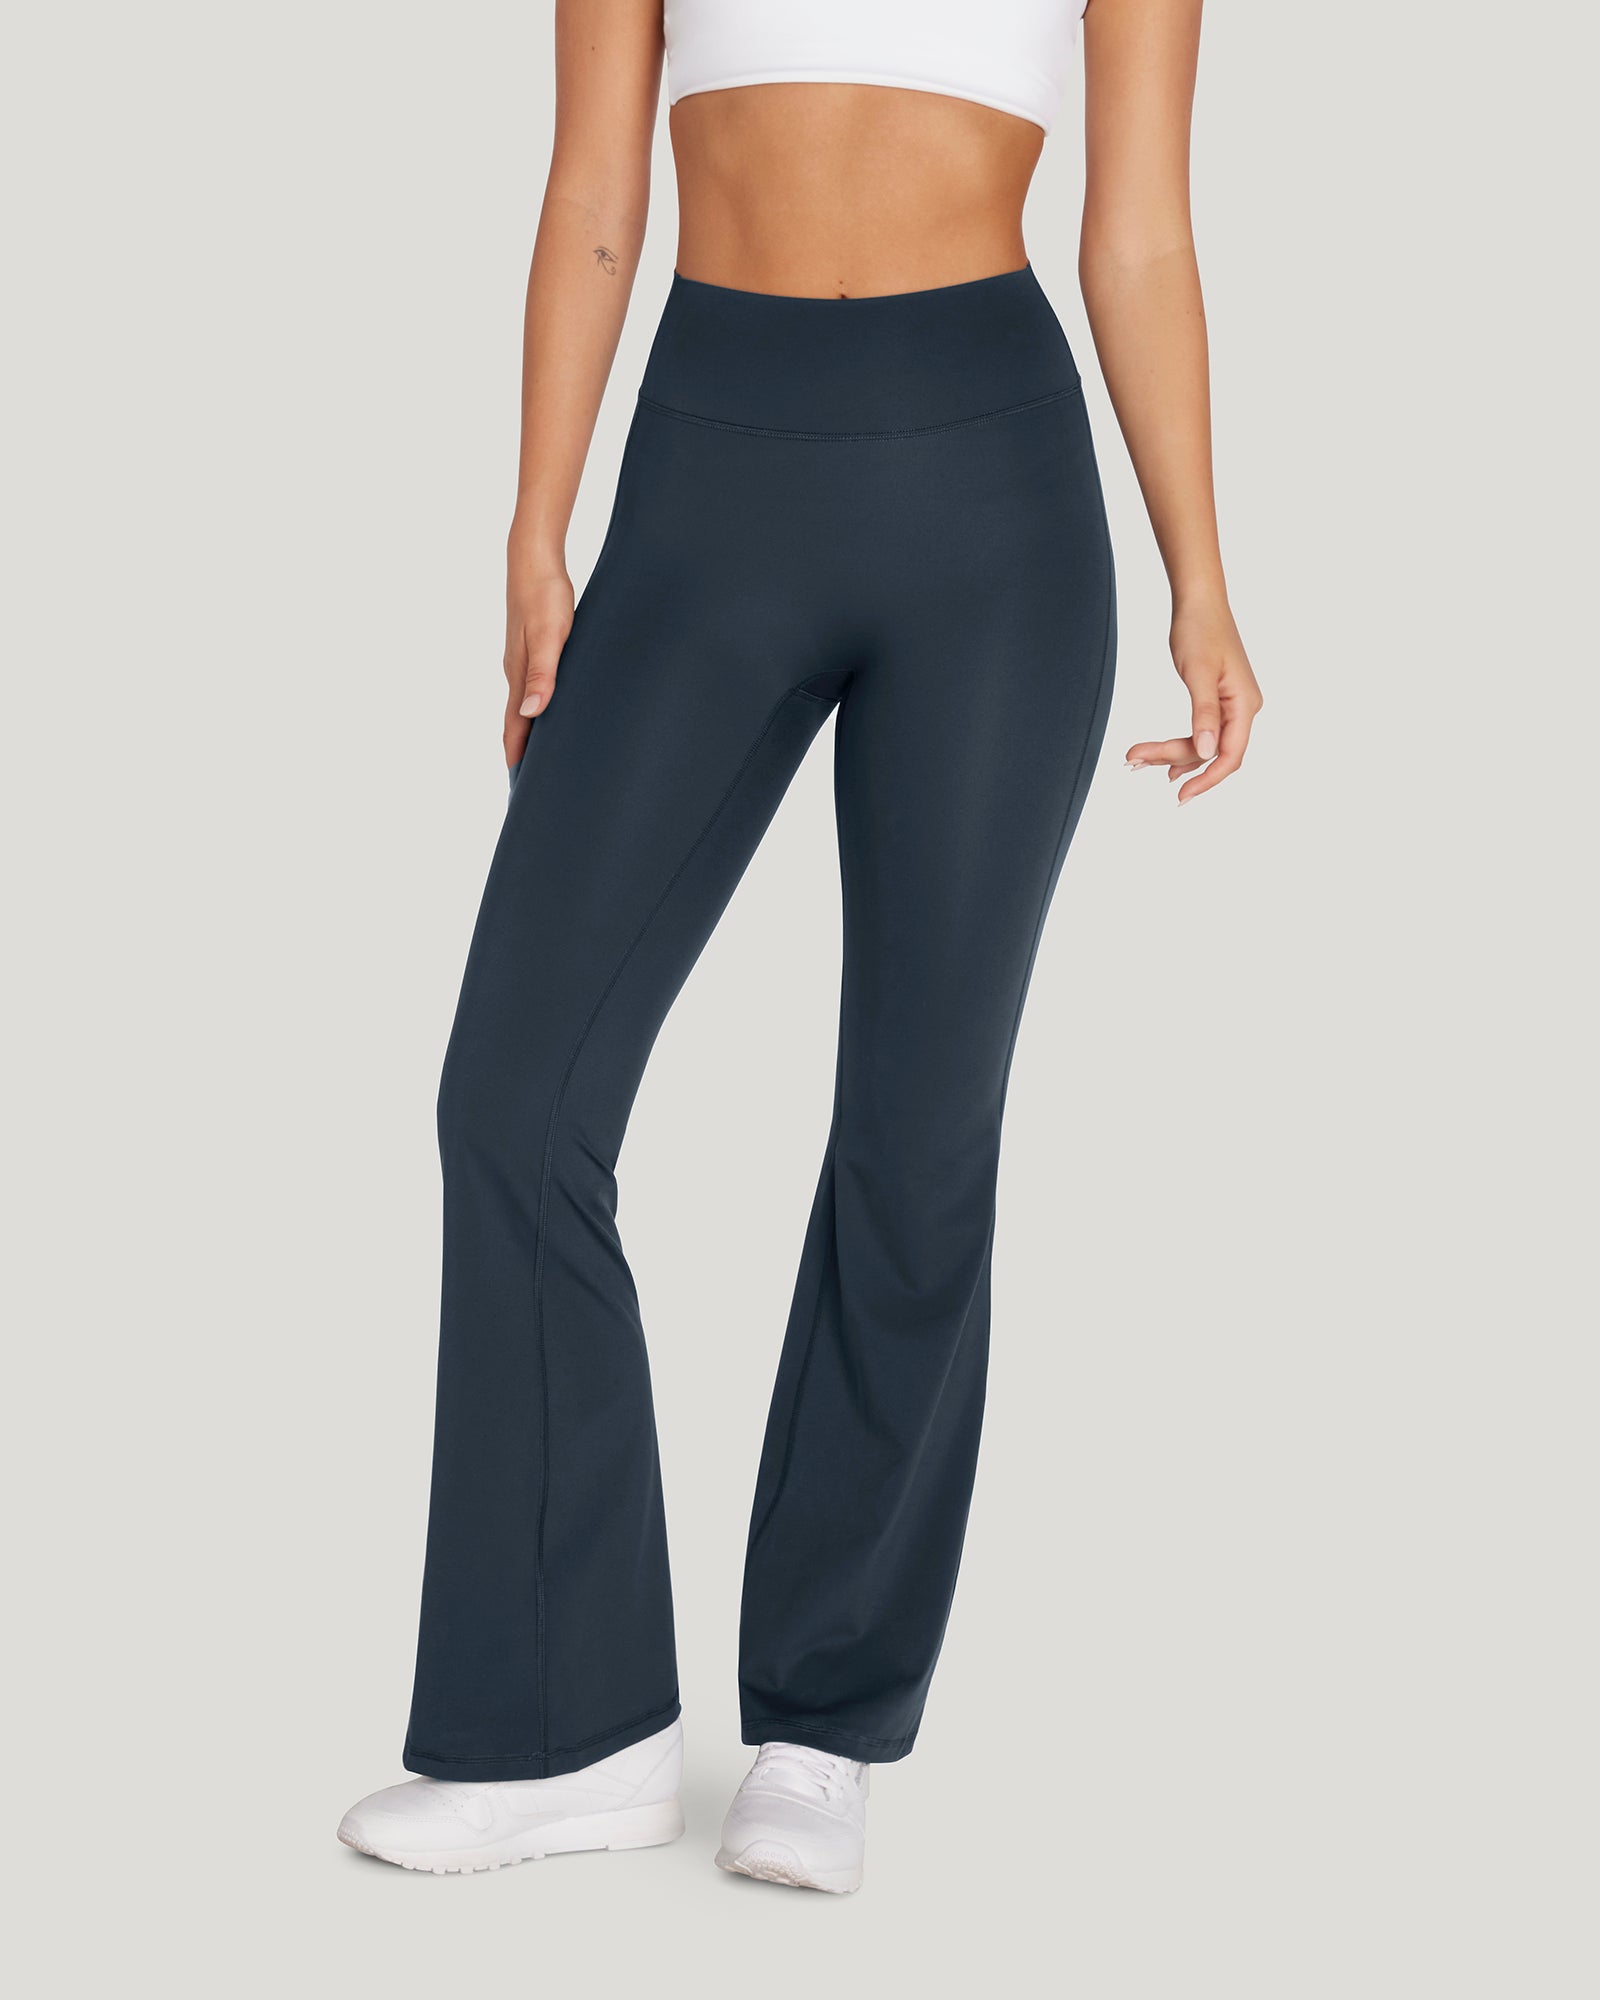 LUXE BELLA FLARES - ALLOY – MUSCLE REPUBLIC